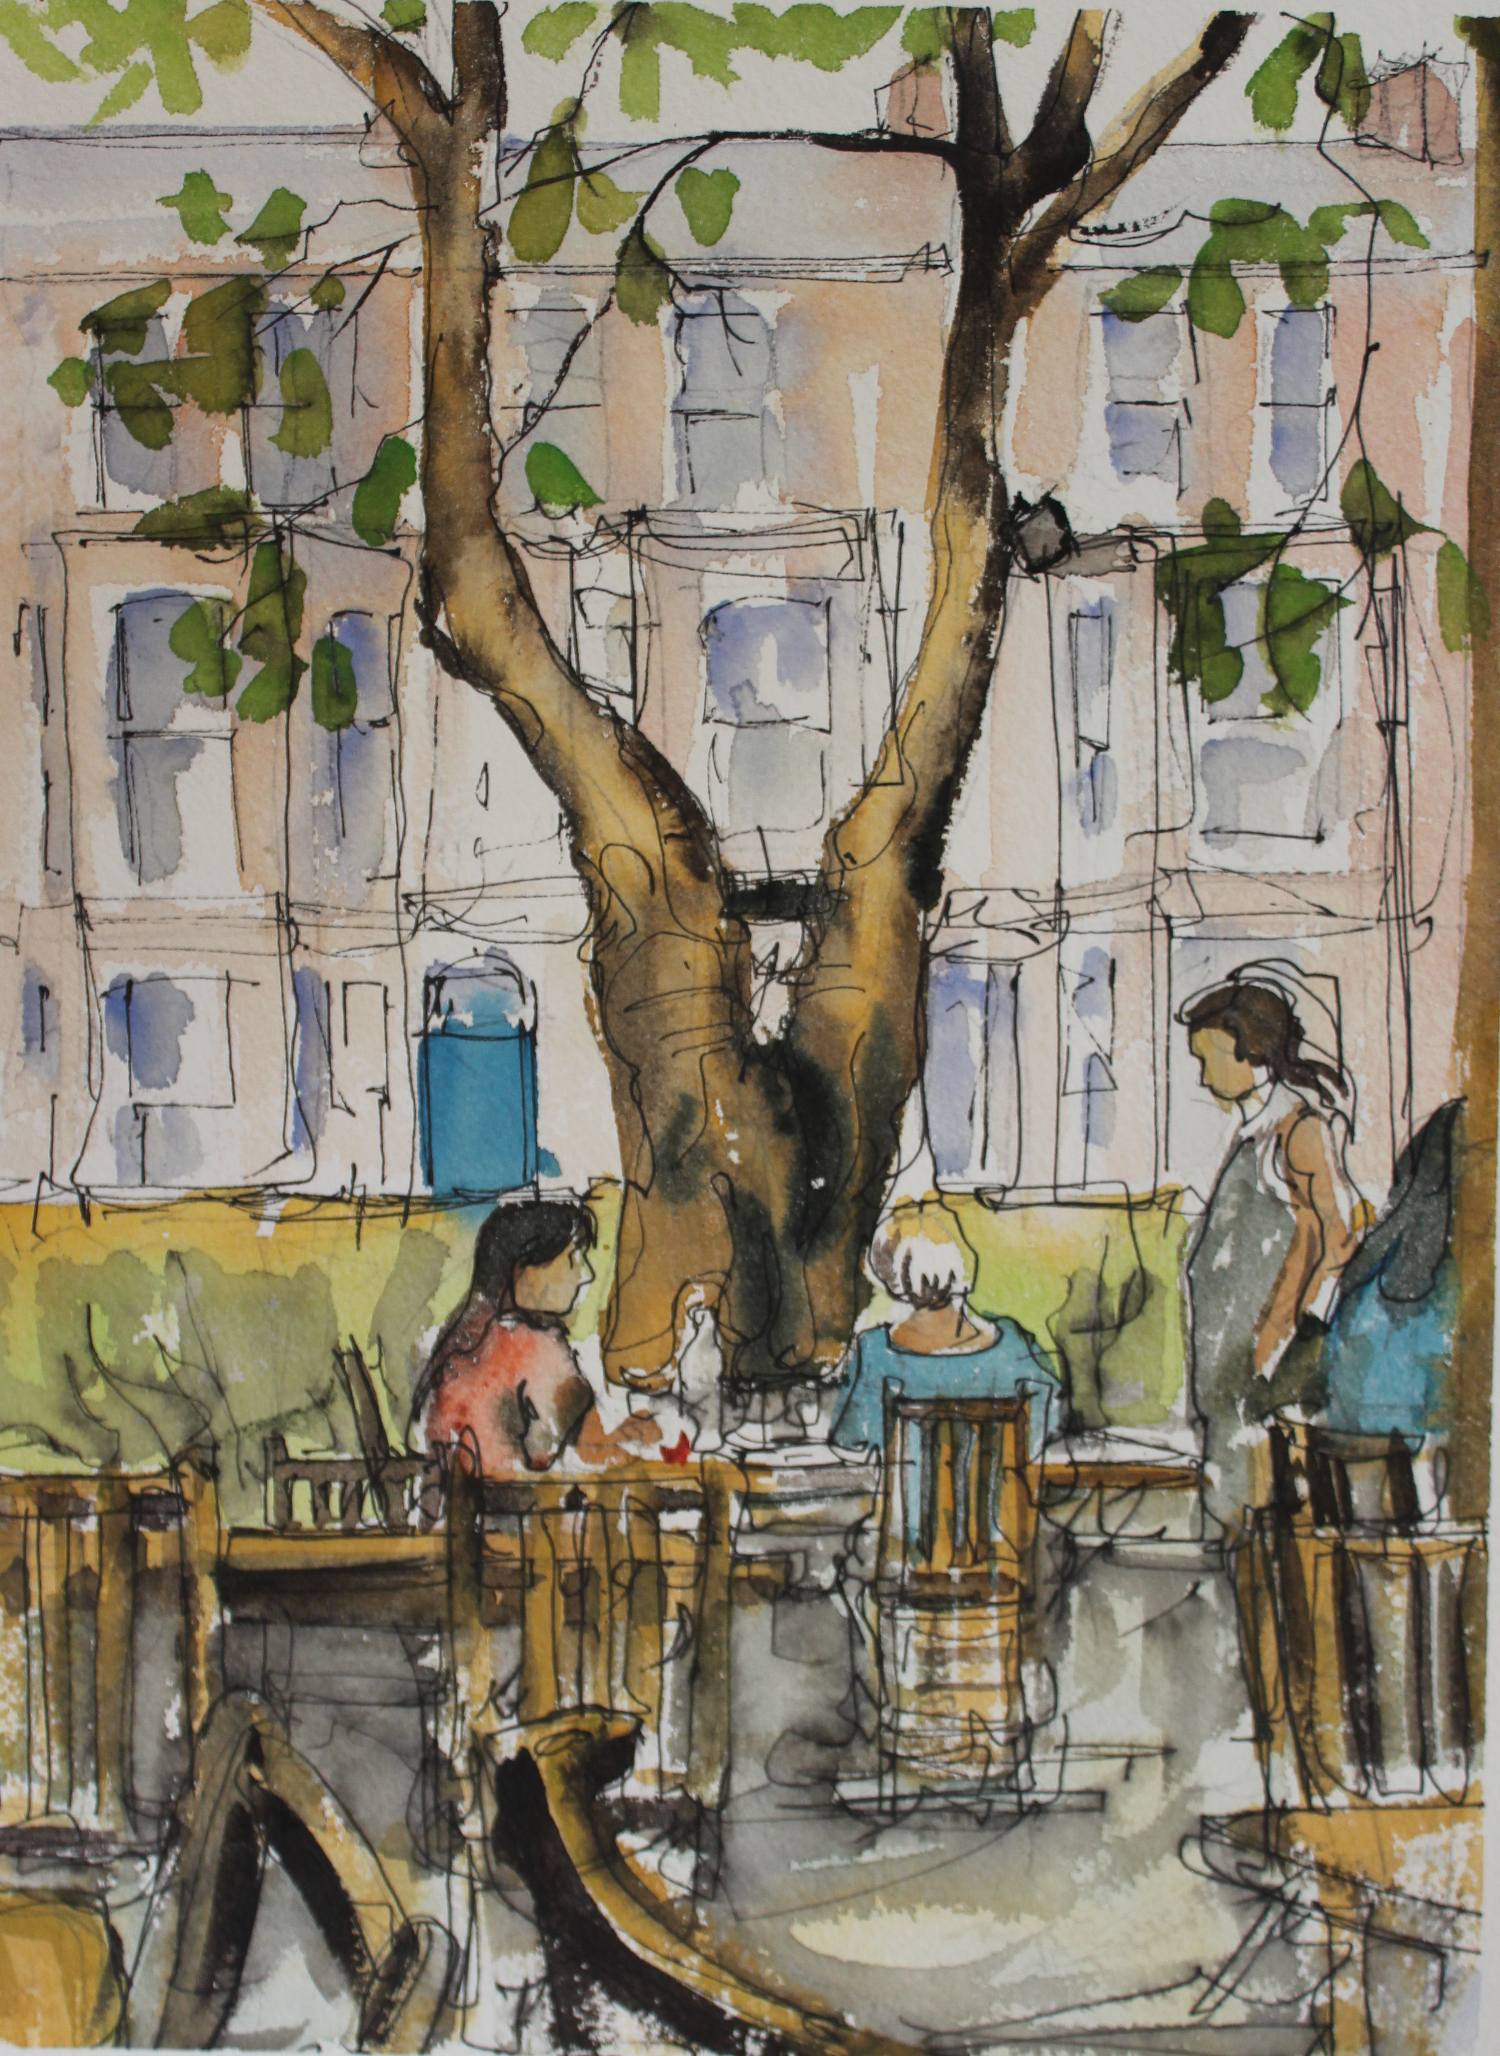 Common Grounds Cafe, Belfast - watercolour